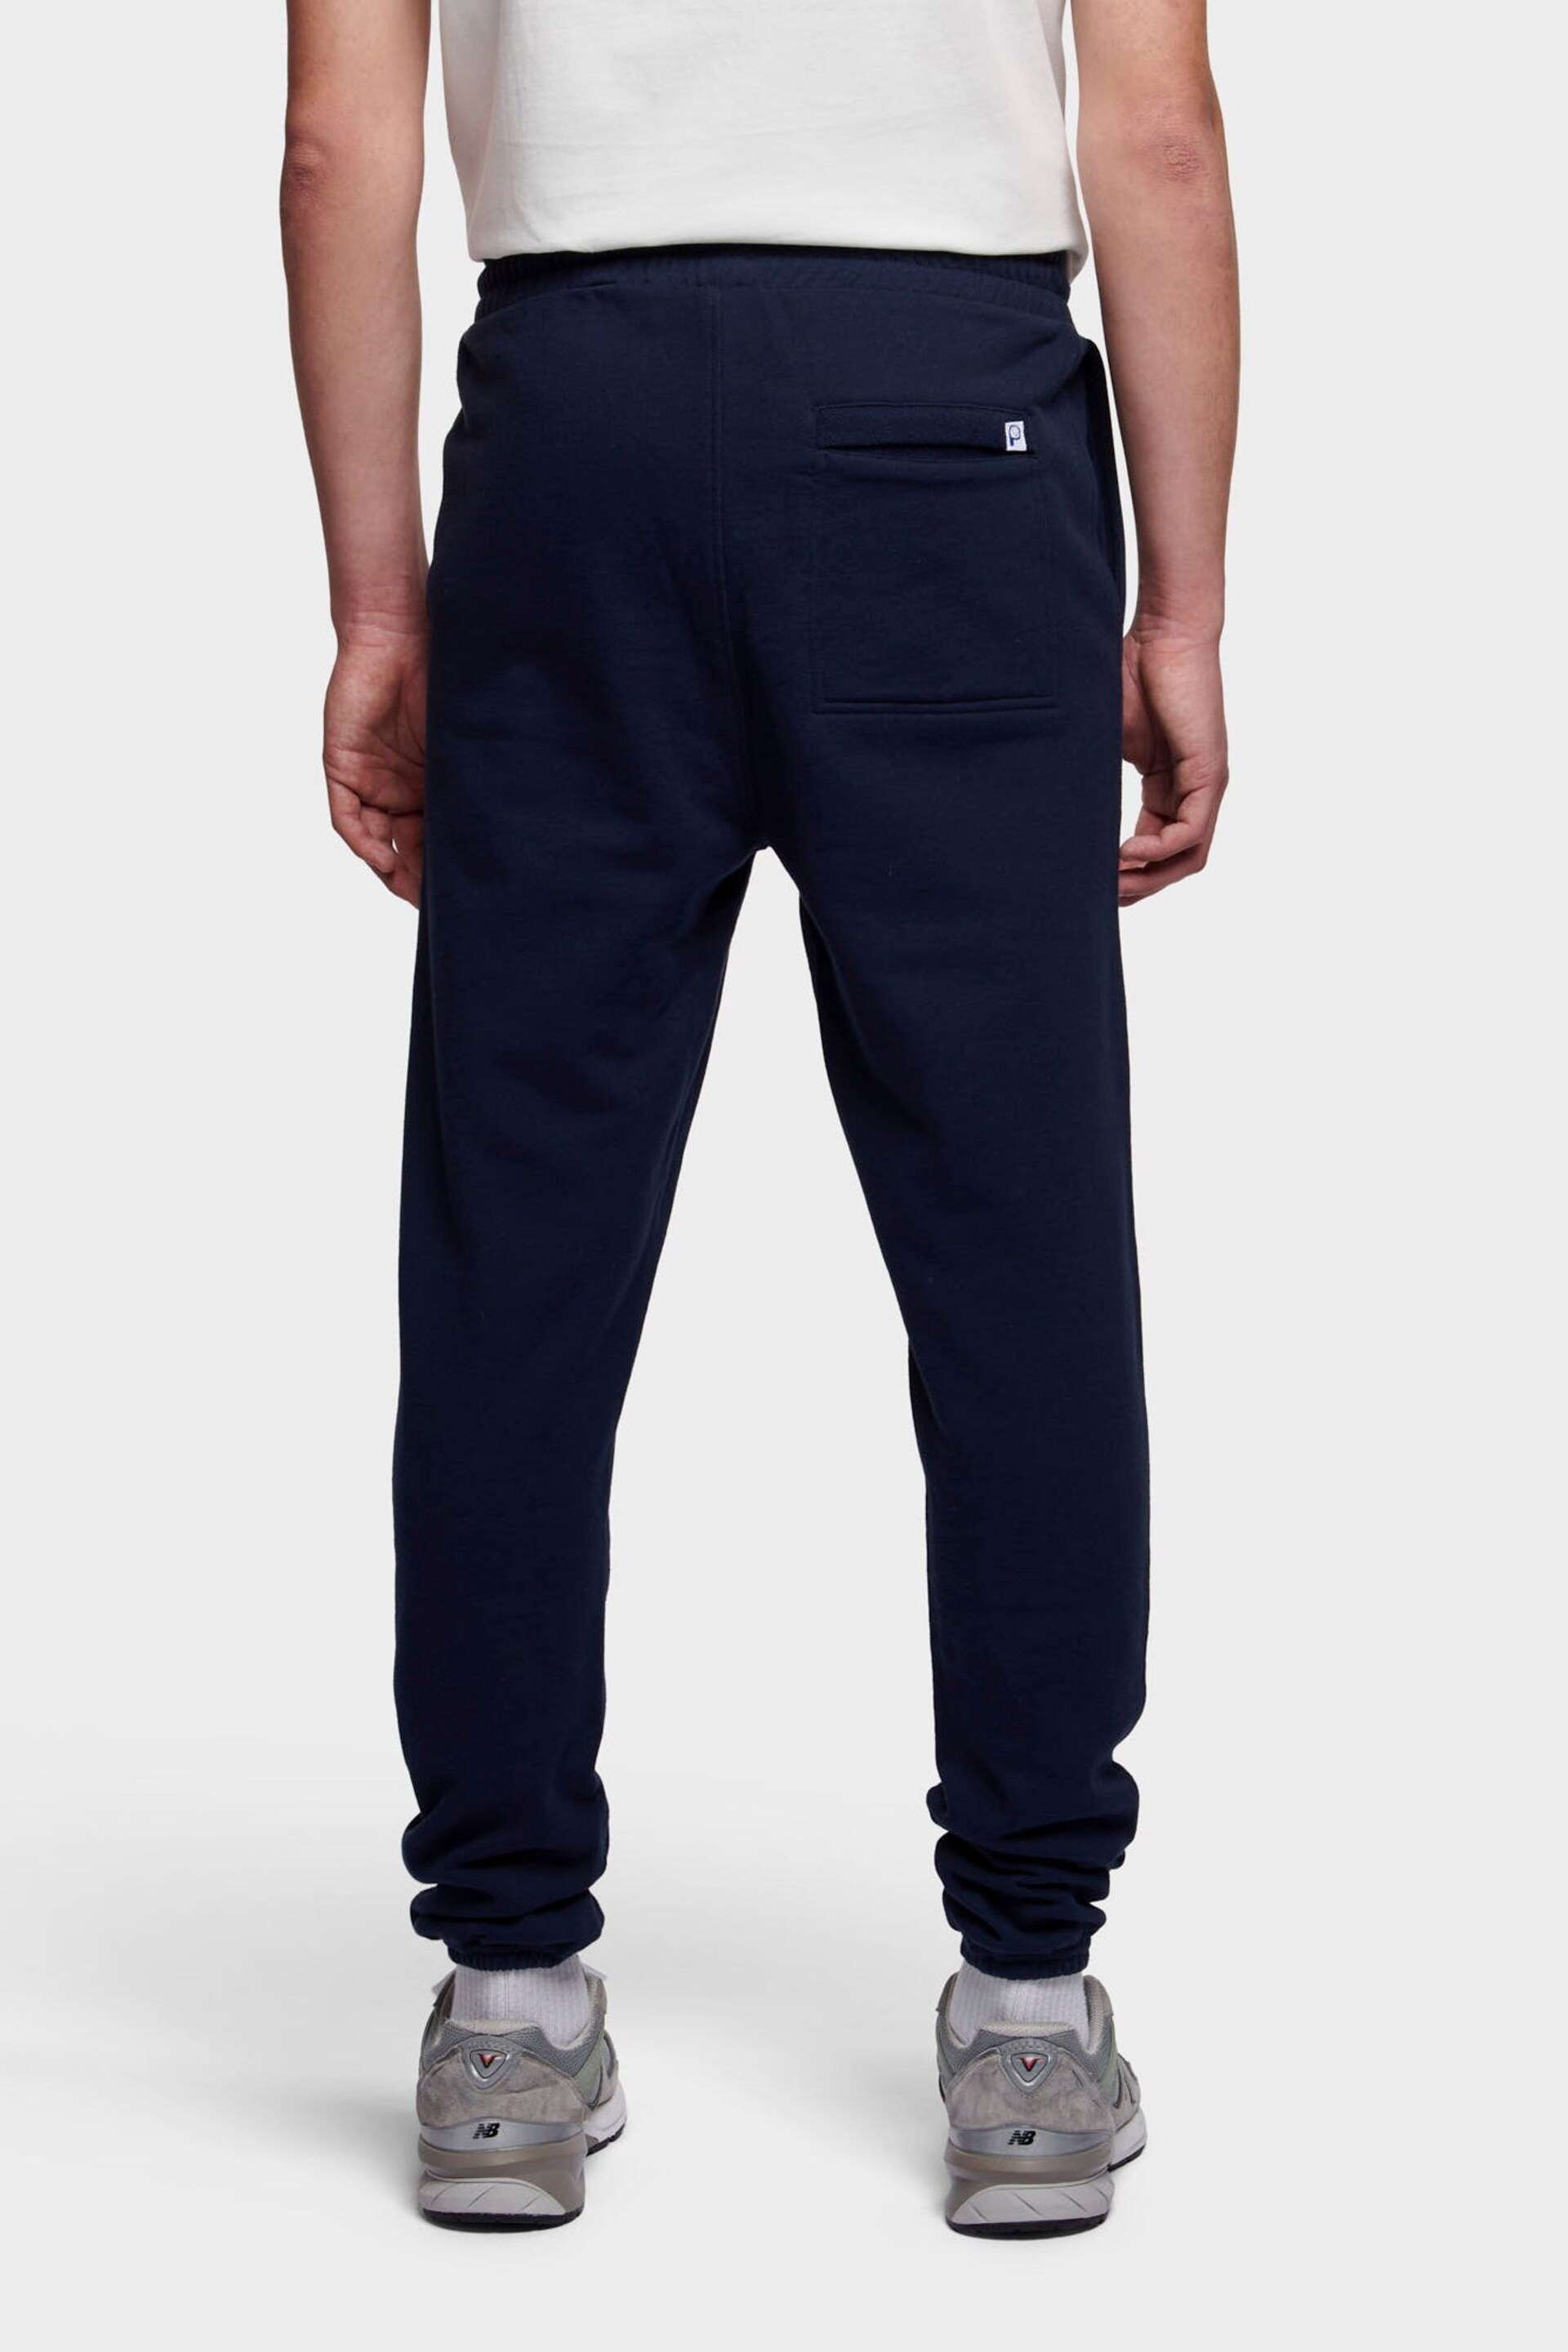 Penfield Mens Relaxed Fit Original Logo Joggers - Image 4 of 7